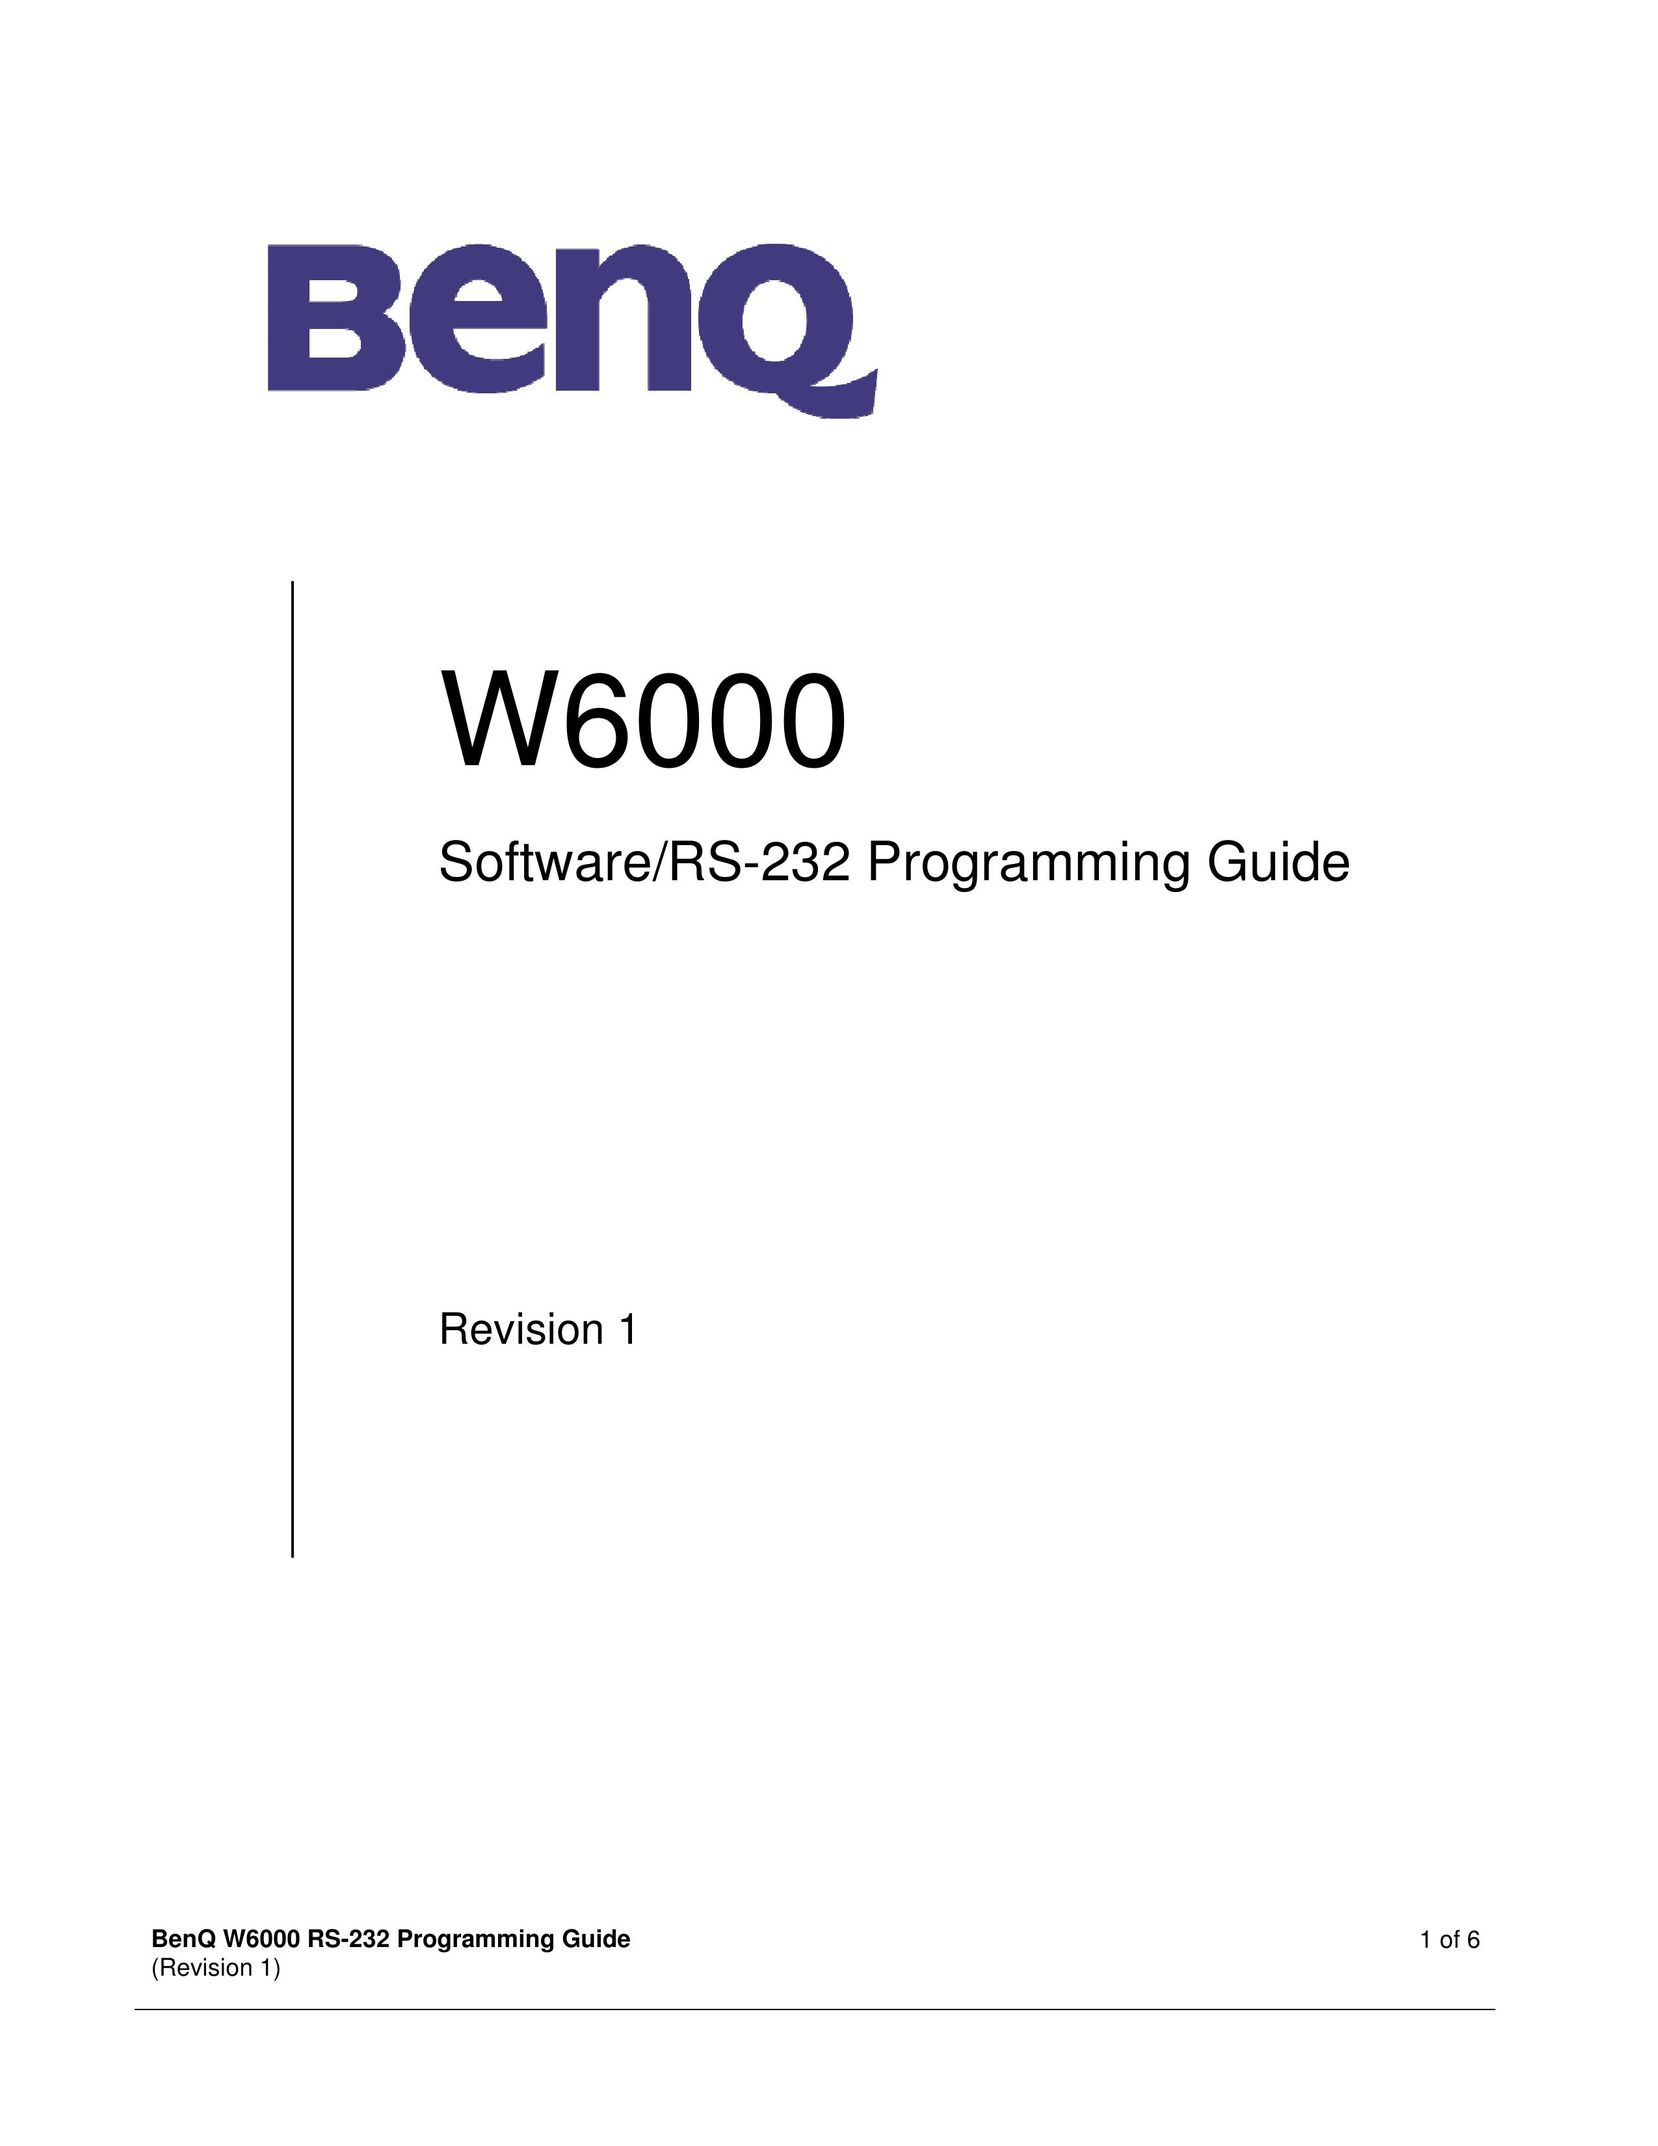 BenQ W6000 Speaker System User Manual (Page 1)